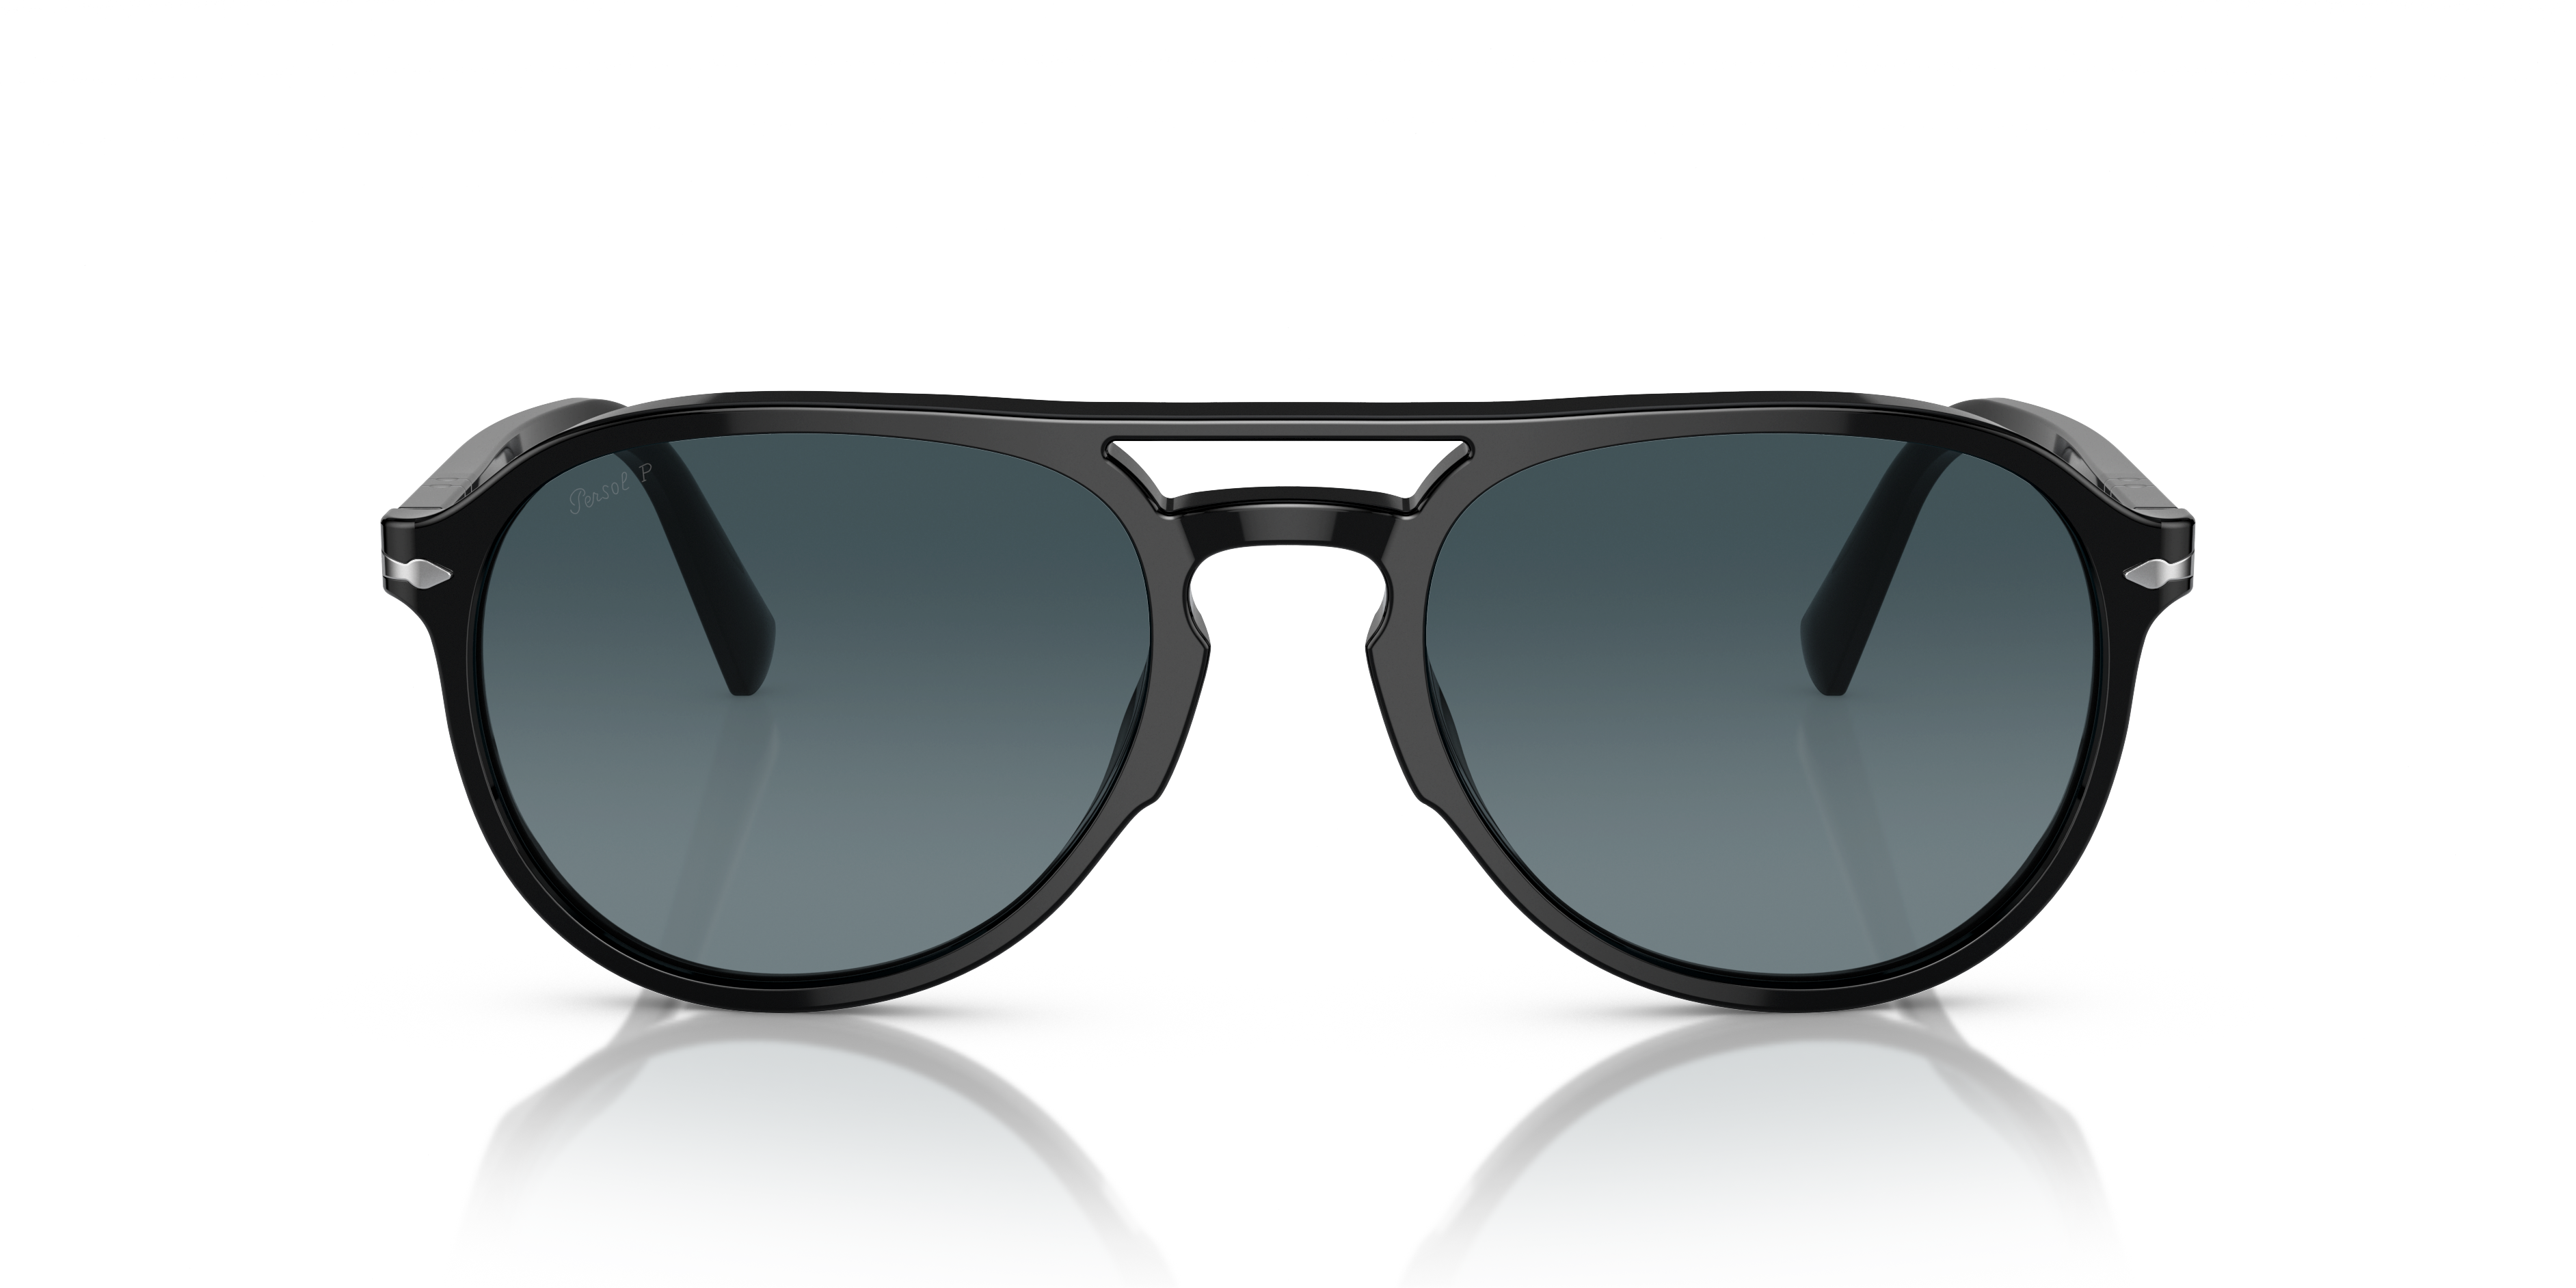 [products.image.front] Persol 0PO3235S 095/S3